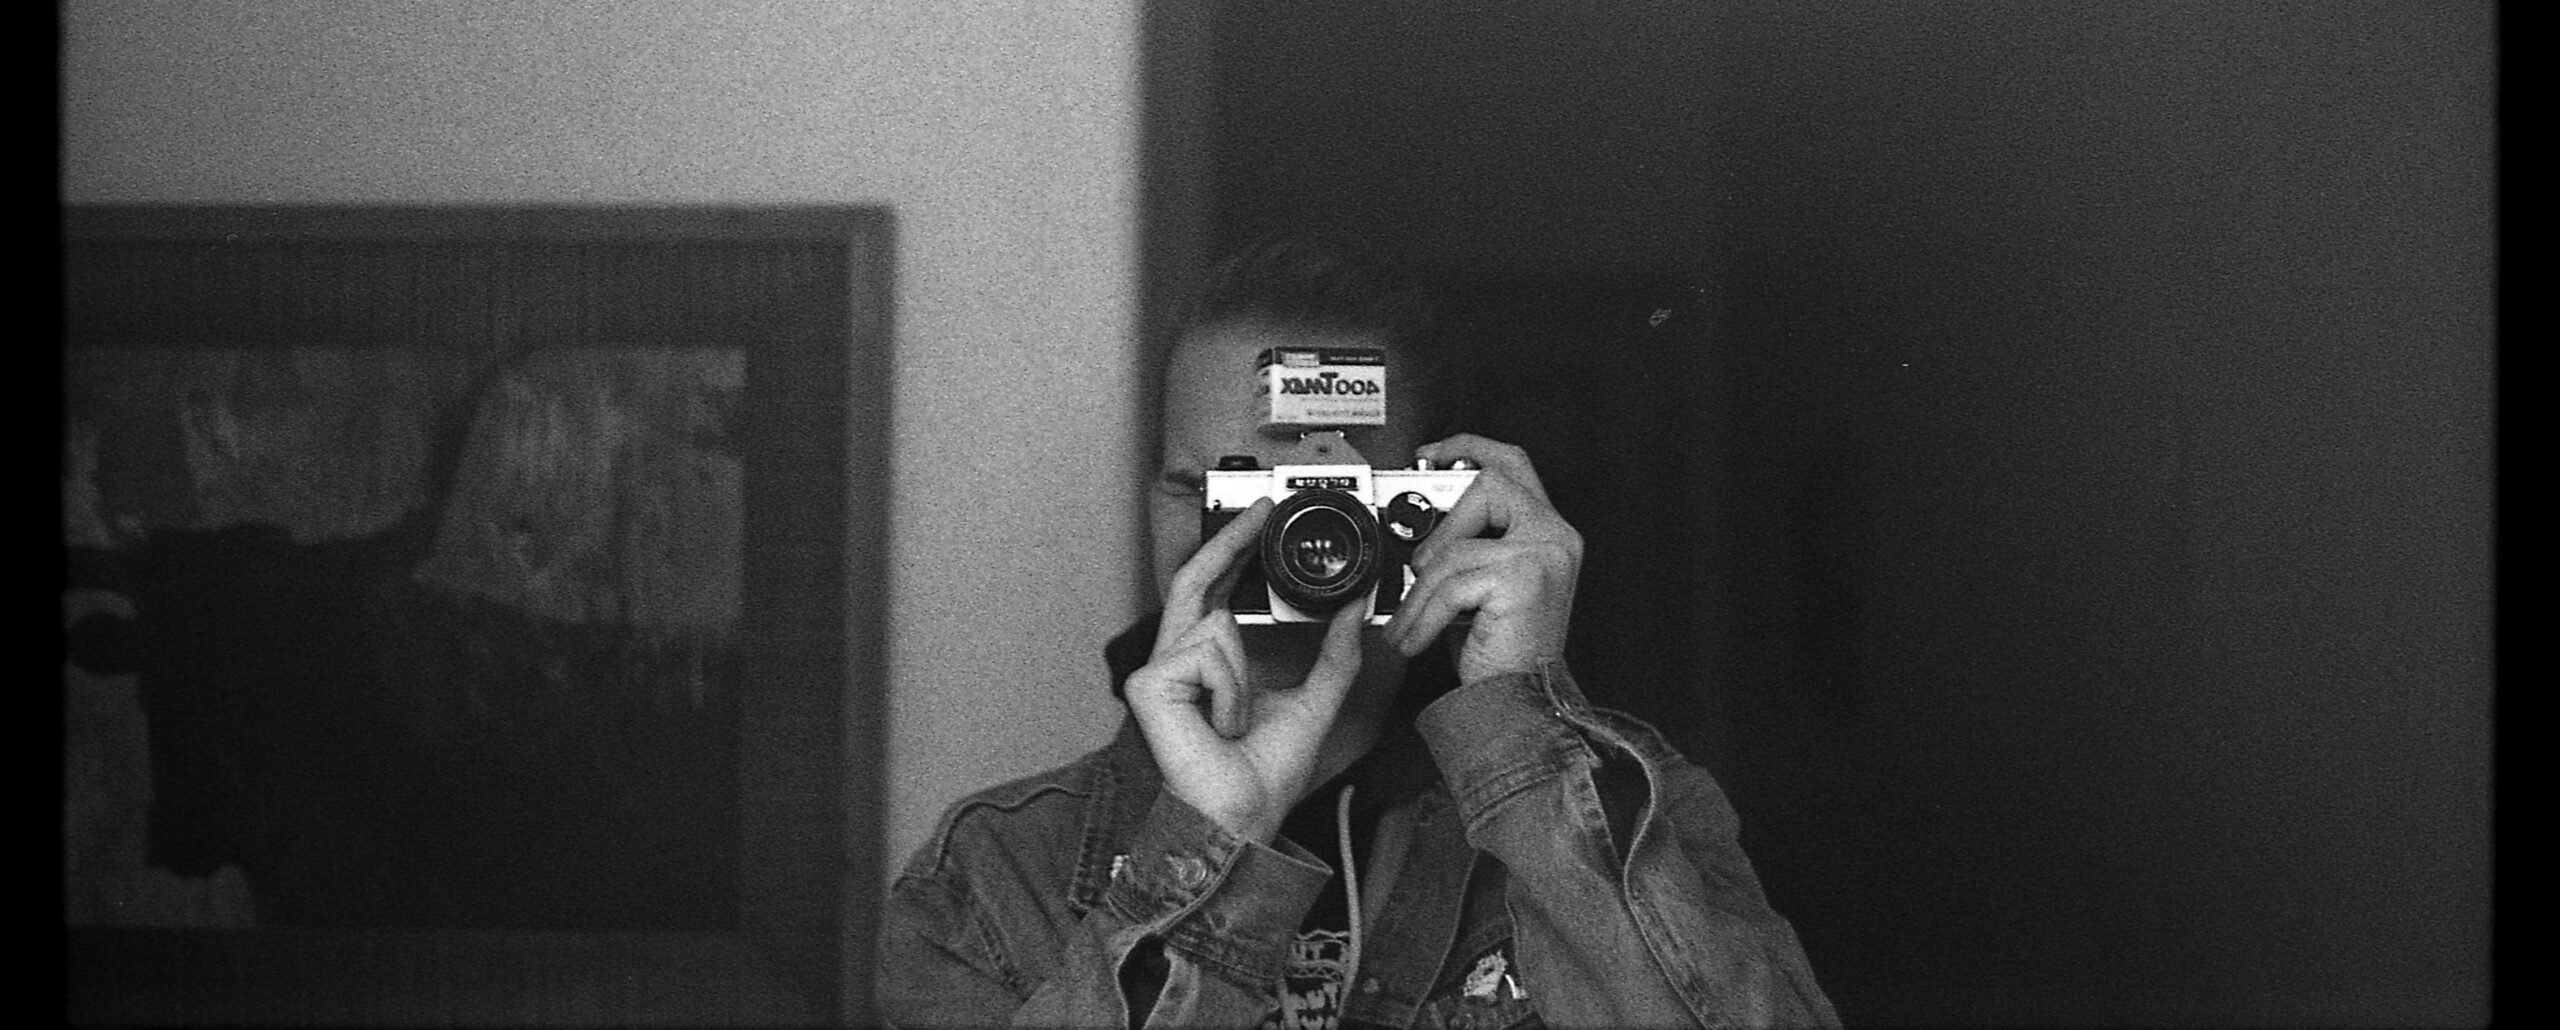 A picture of a person holding a camera and a box of tmax 400 film in a mirror